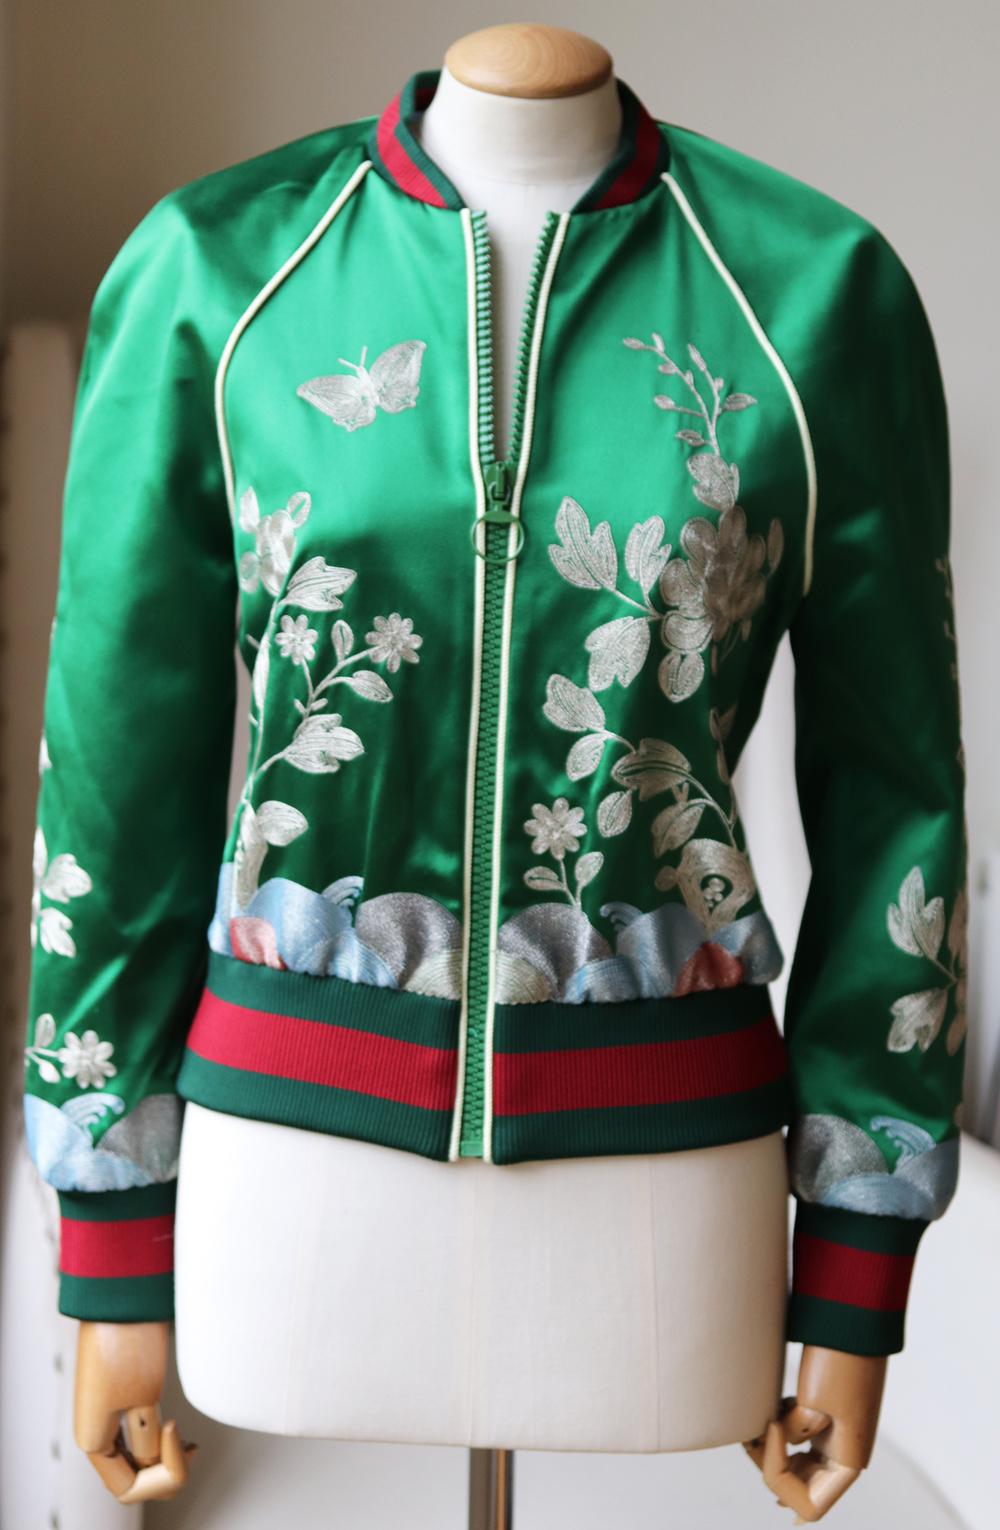 Gucci's statement bomber jackets have been a key feature of every season as they are easy to dress up or down. 
Designed with the brand's signature red and green ribbed trims, this silk-satin style is decorated with metallic floral